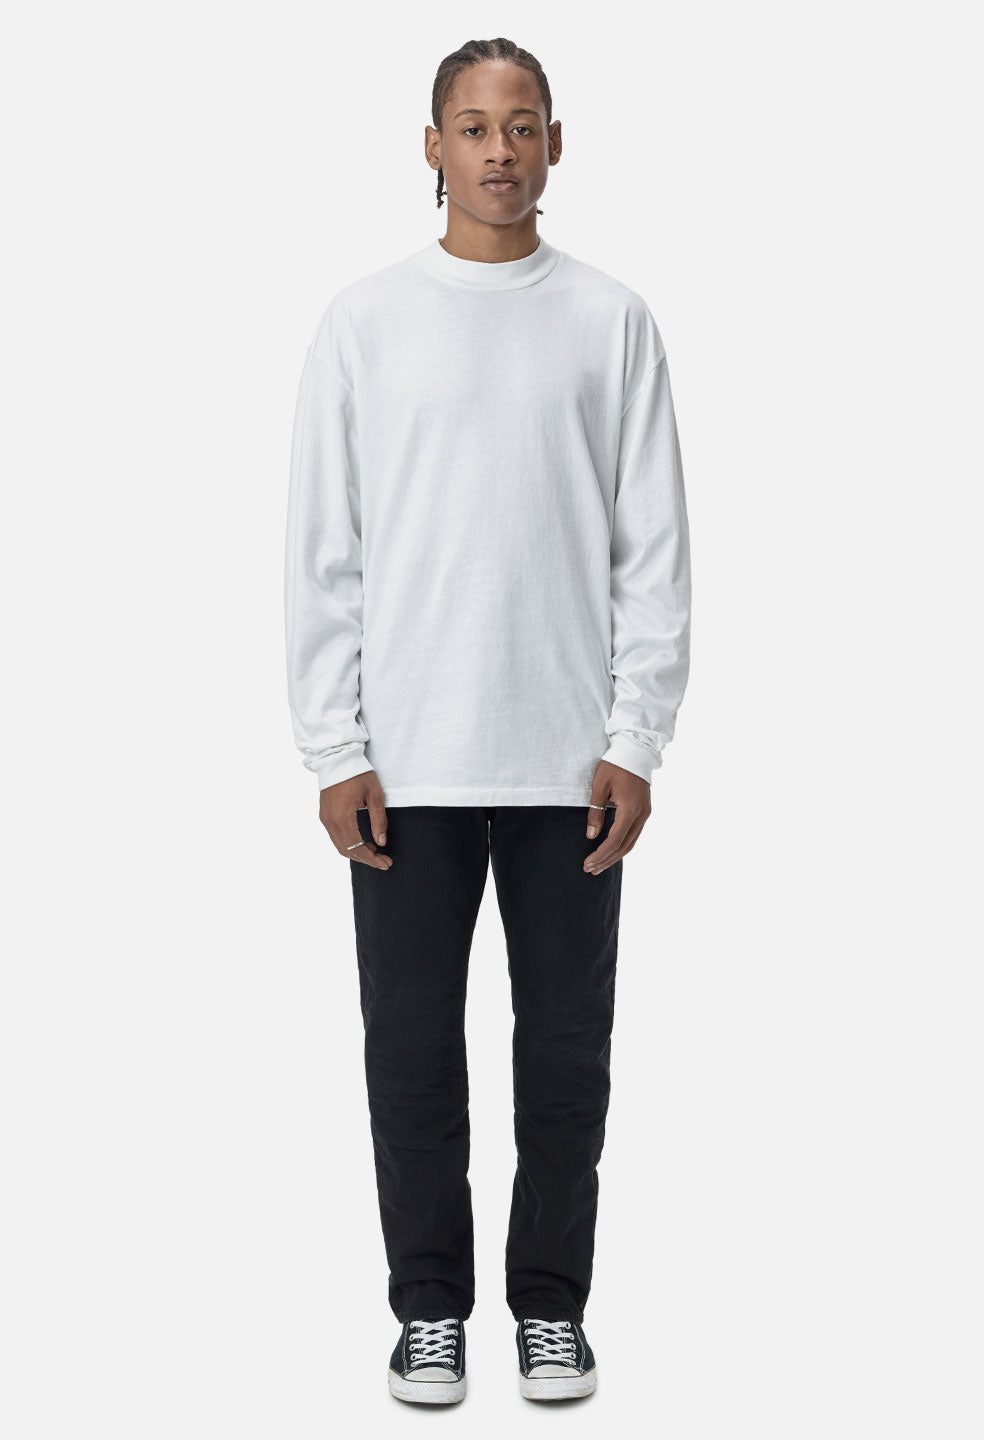 Mock up of white long sleeve t-shirt and short pants wearing by